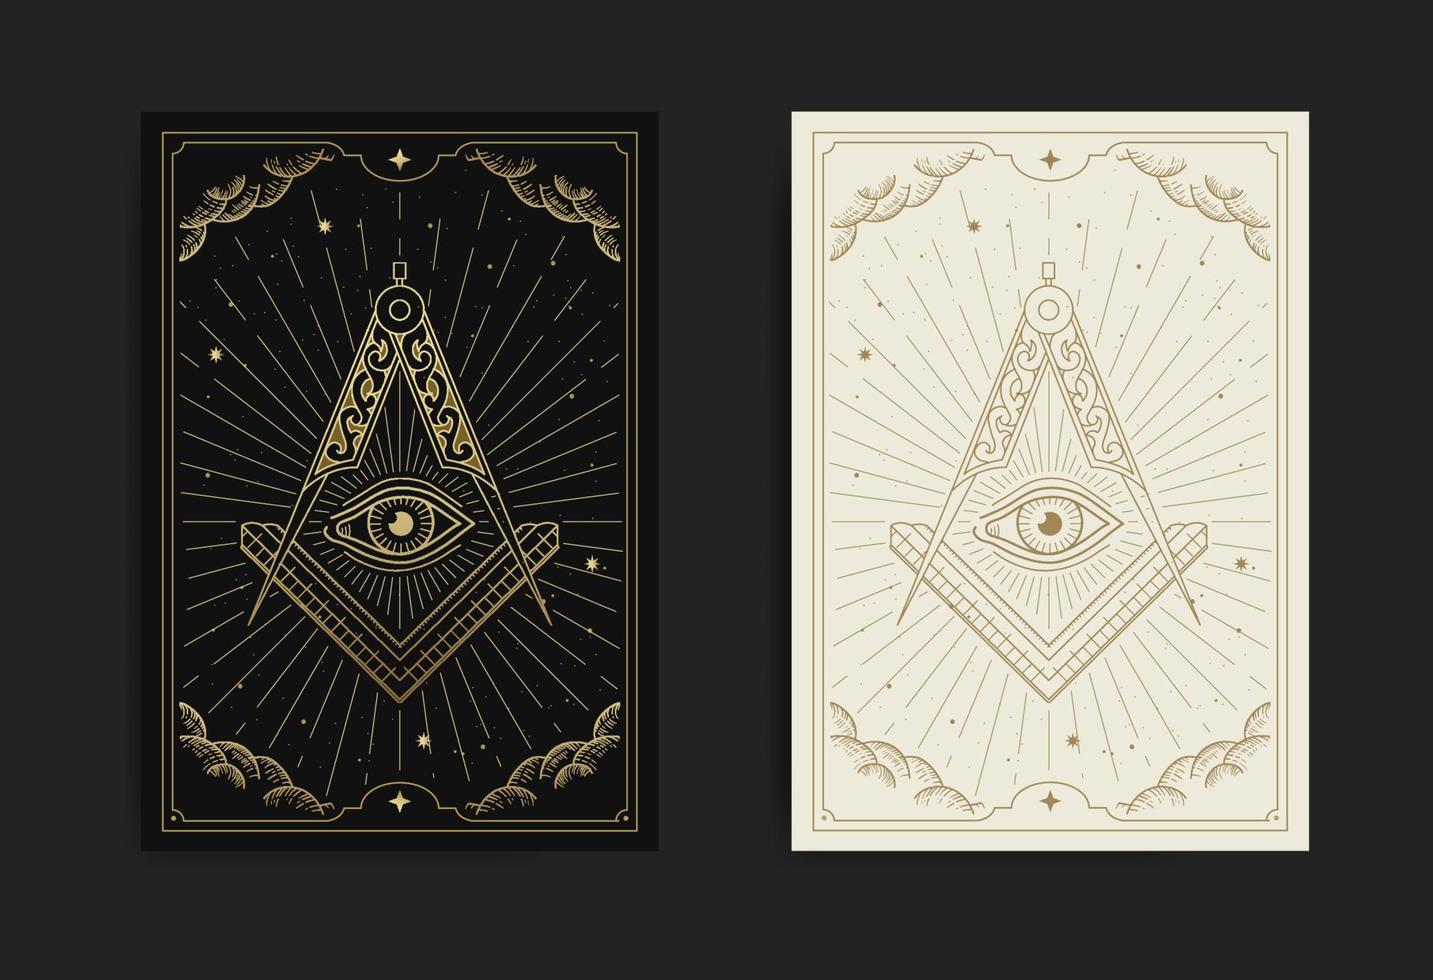 The Square, Compasses and All-Seeing Eye with engraving, handrawn, luxury, esoteric, boho style vector